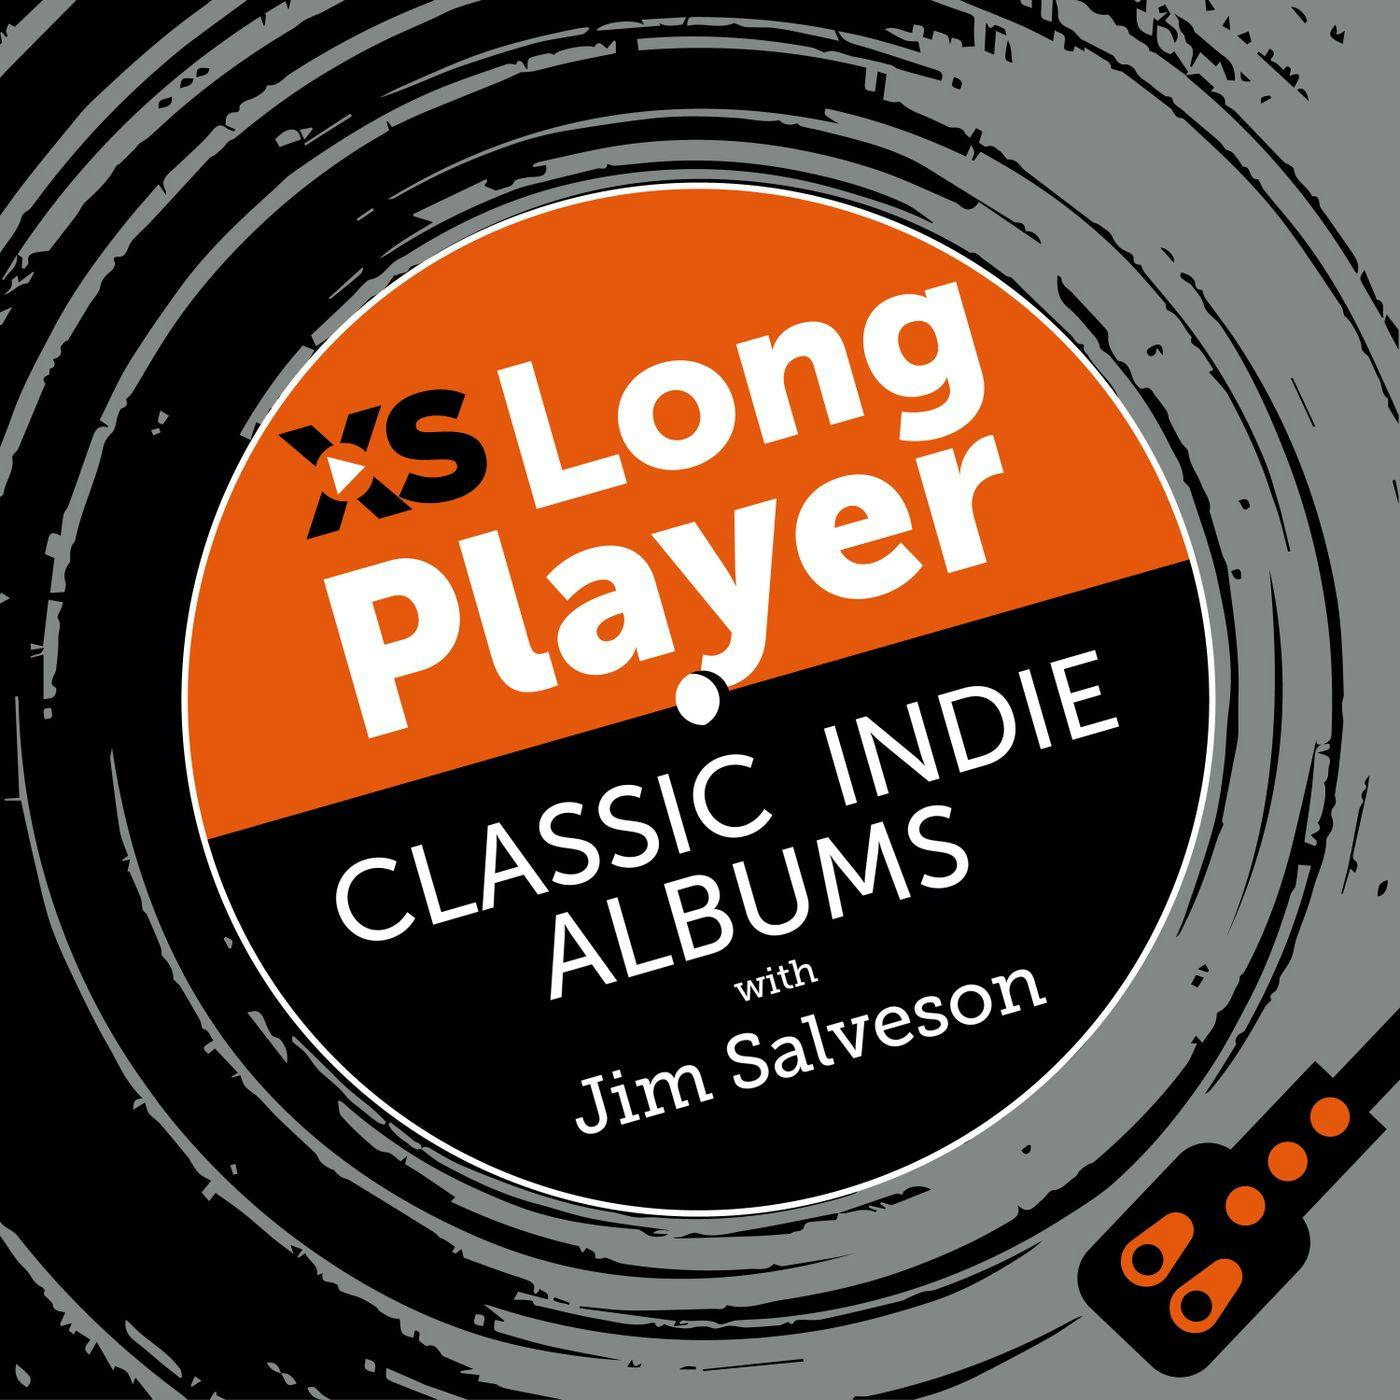 XS Long Player: Classic Indie Albums podcast show image